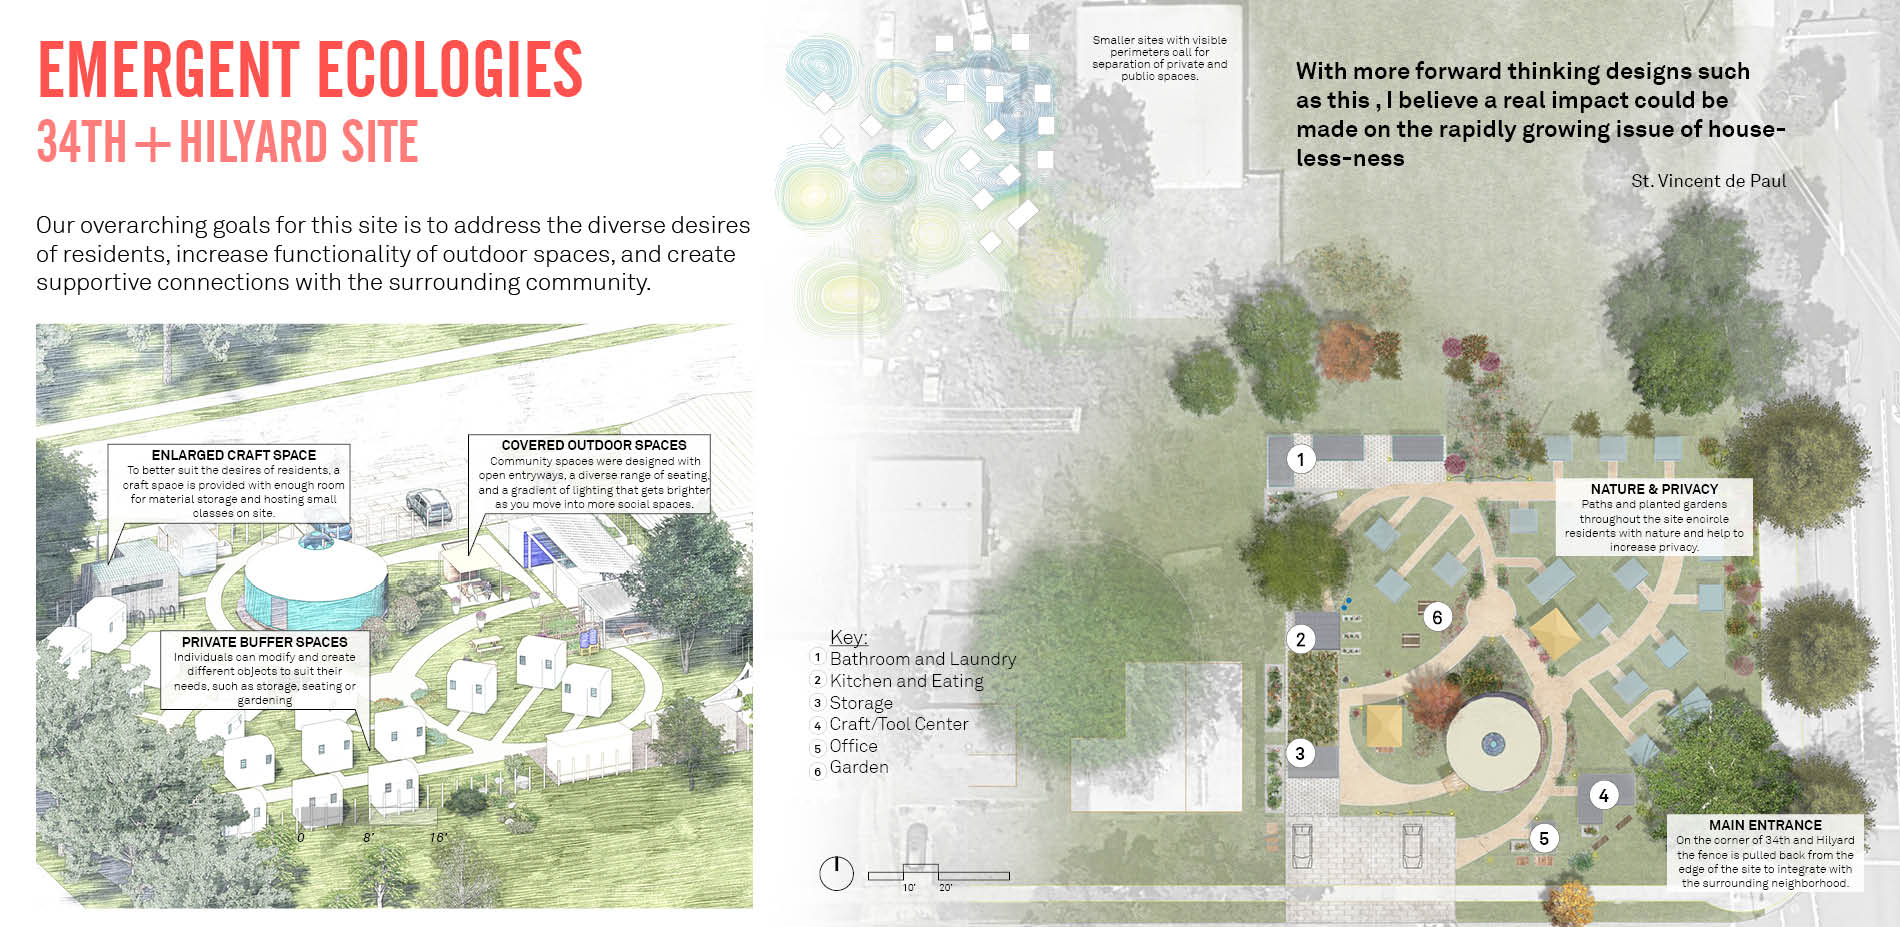 The Emergent Ecologies Plan ( 34th + Hilyard Site )